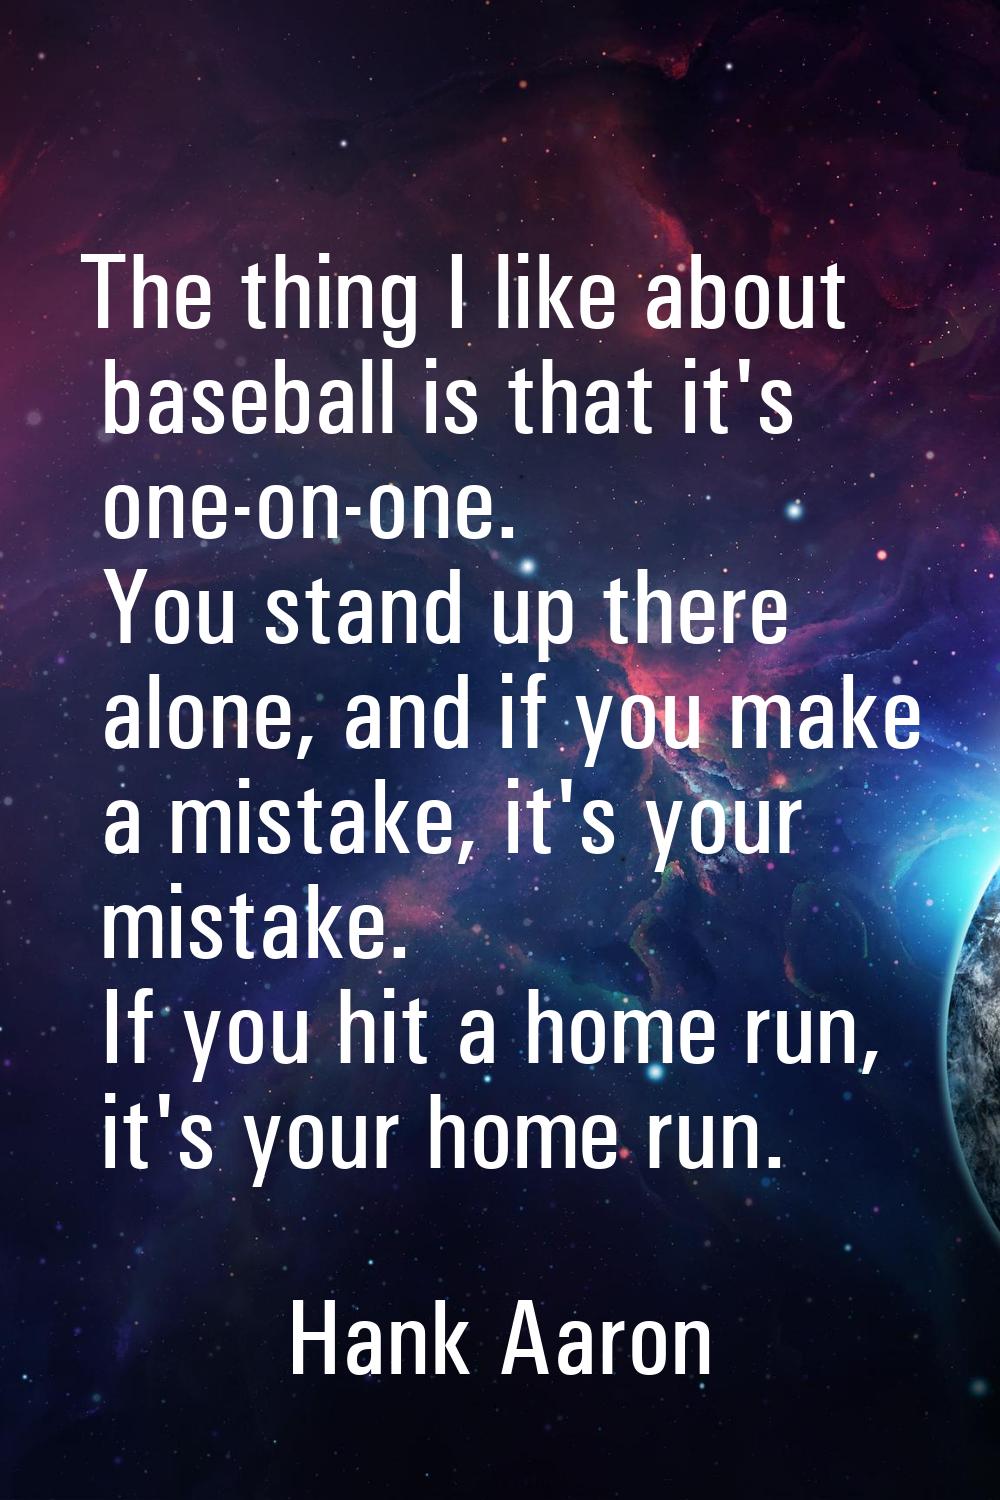 The thing I like about baseball is that it's one-on-one. You stand up there alone, and if you make 